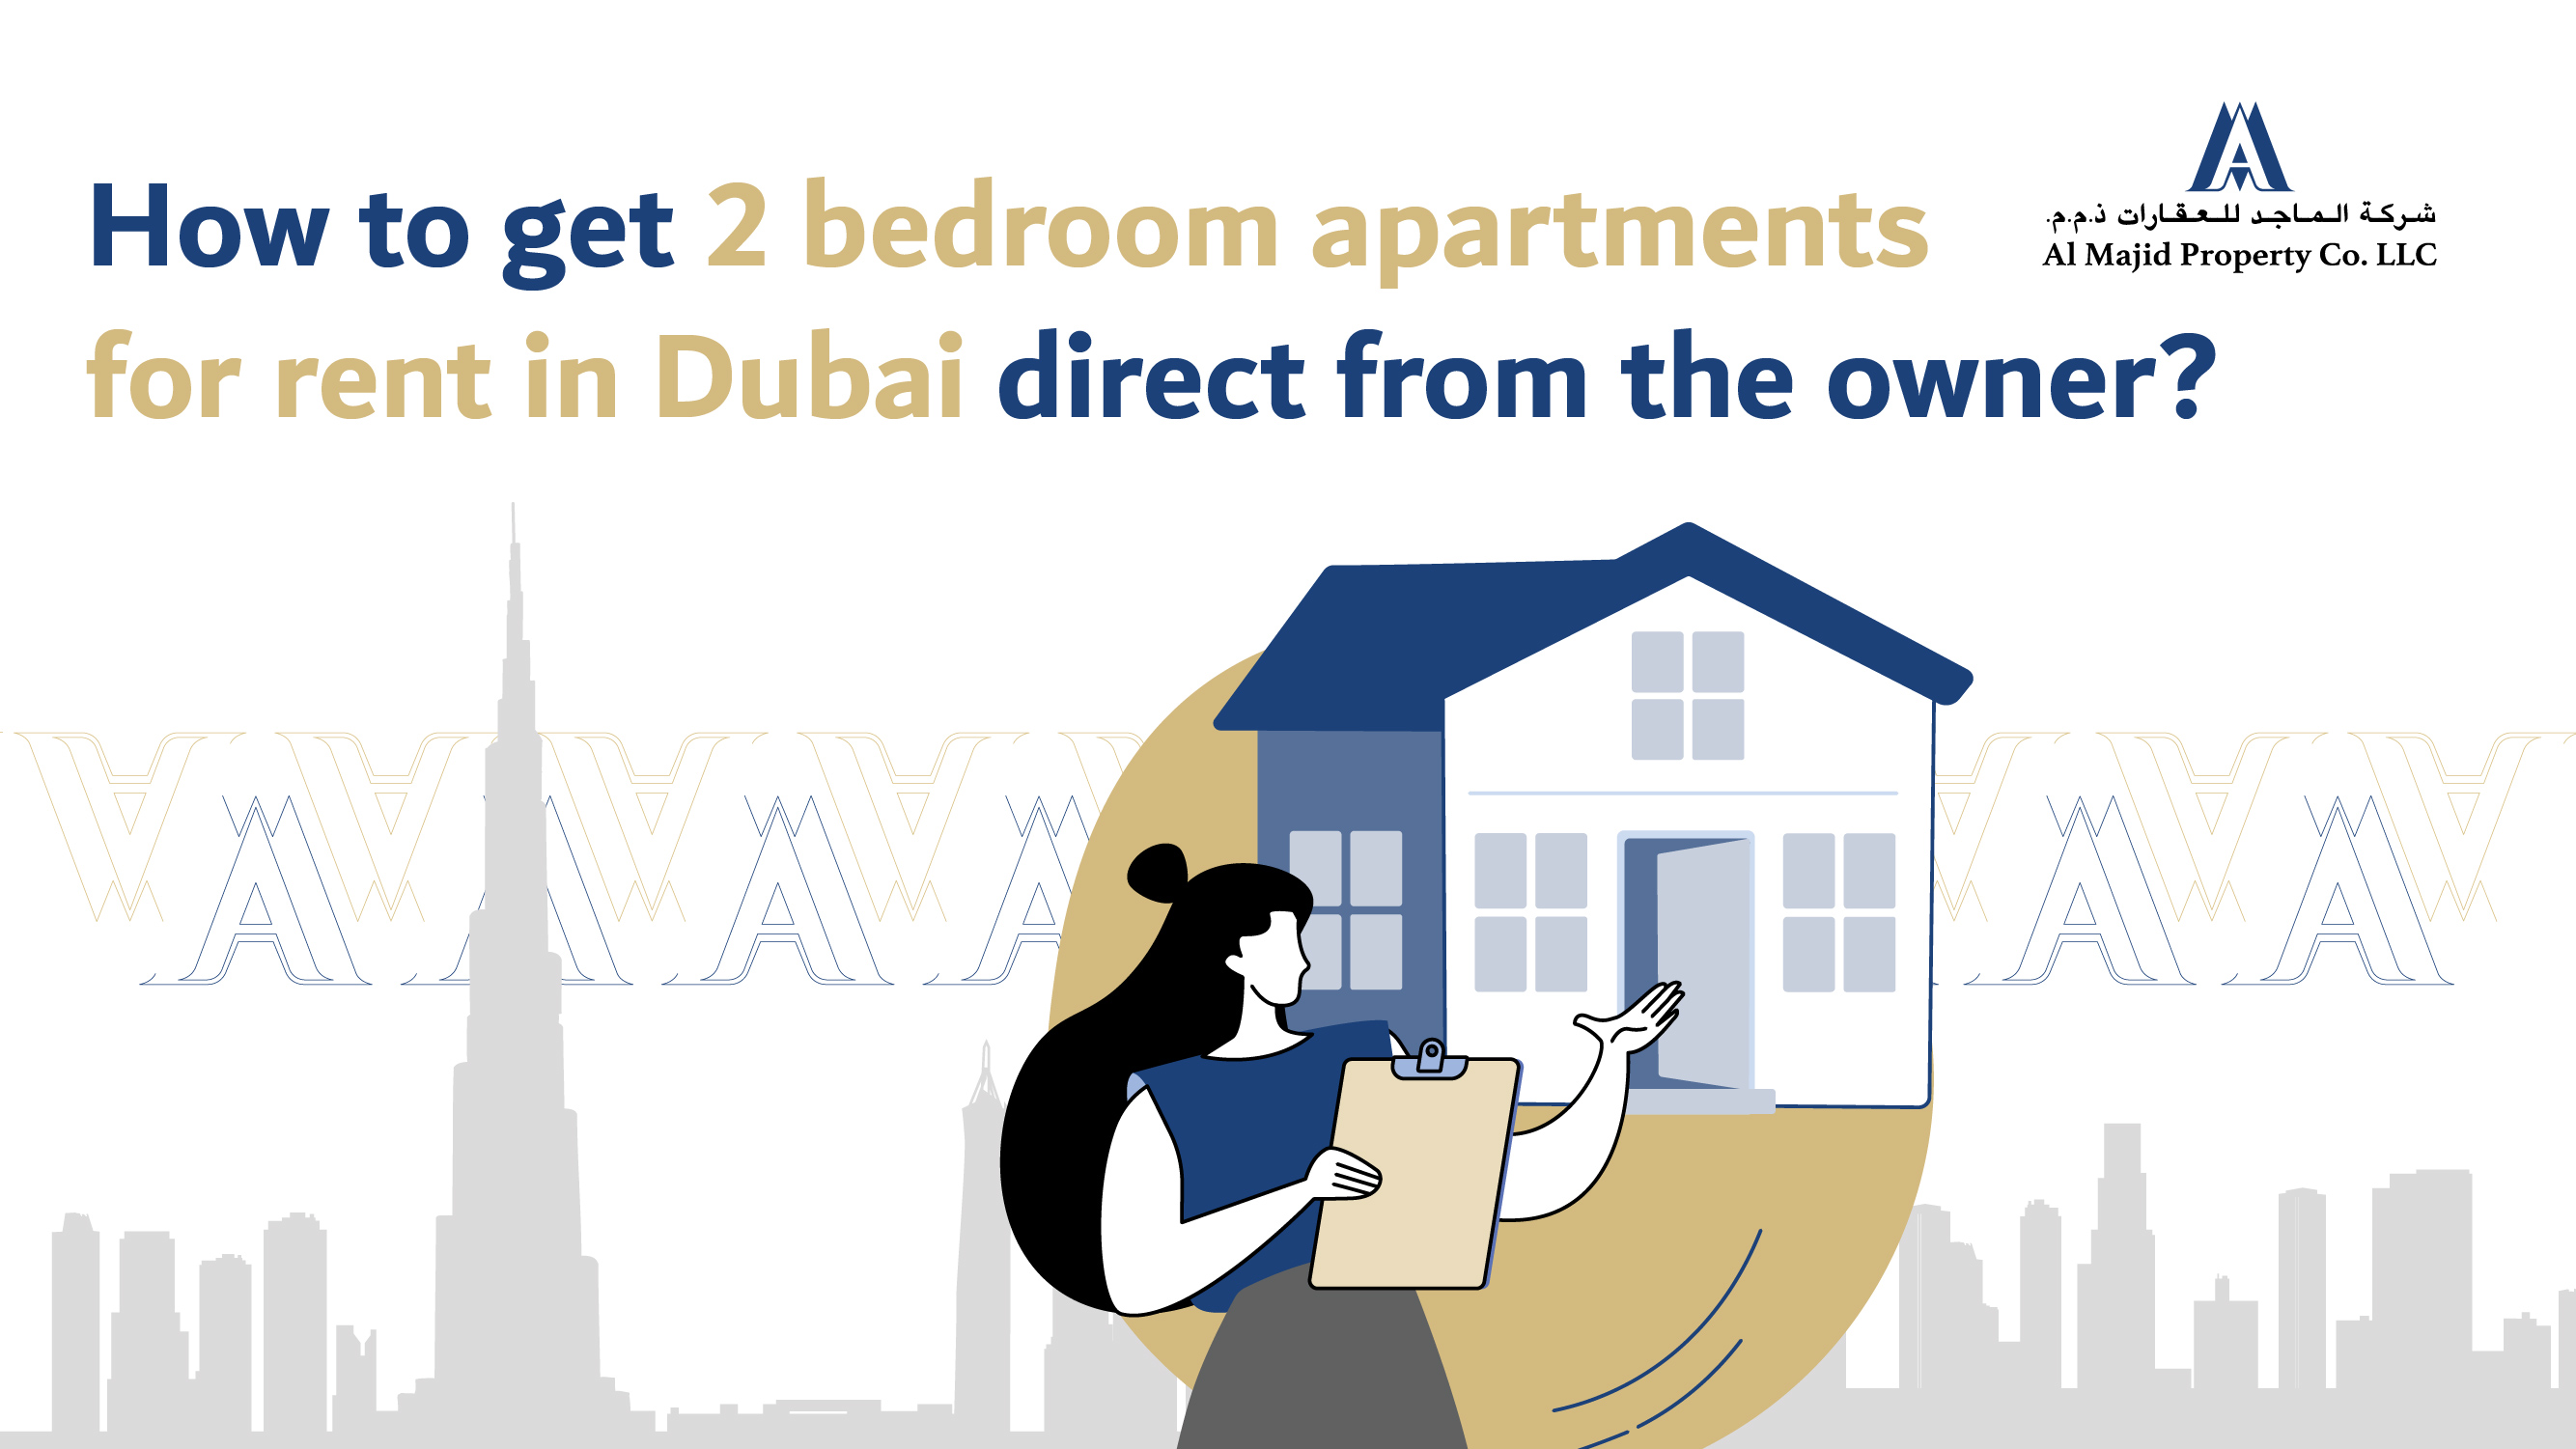 How to Get a 2 Bedroom Apartment for Rent in Dubai Directly From the Owner